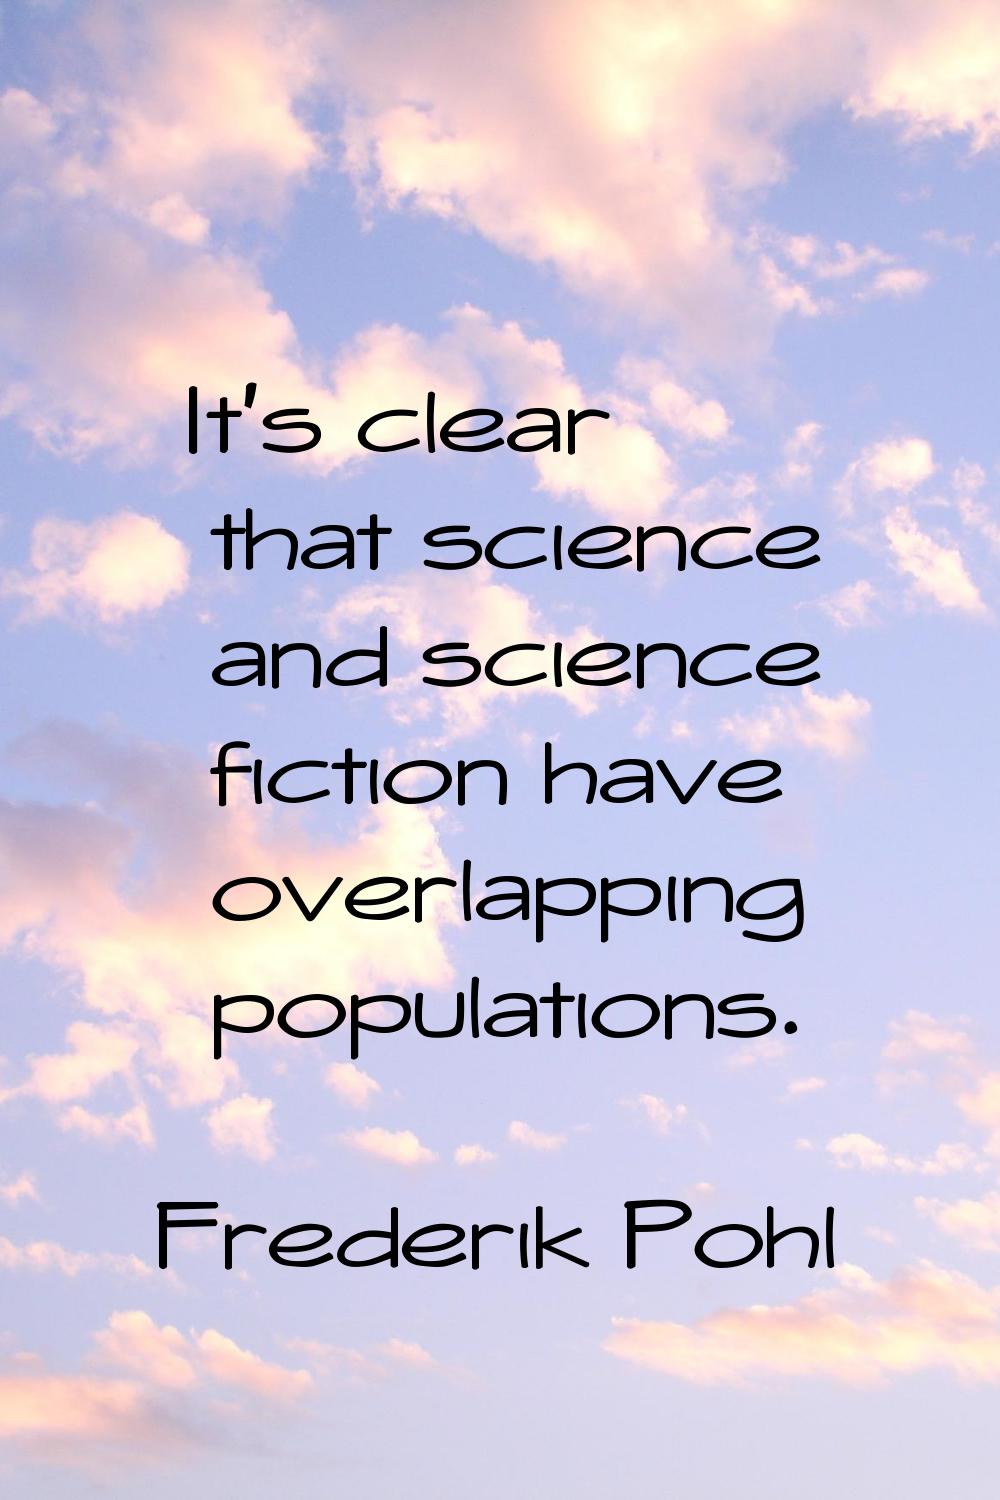 It's clear that science and science fiction have overlapping populations.